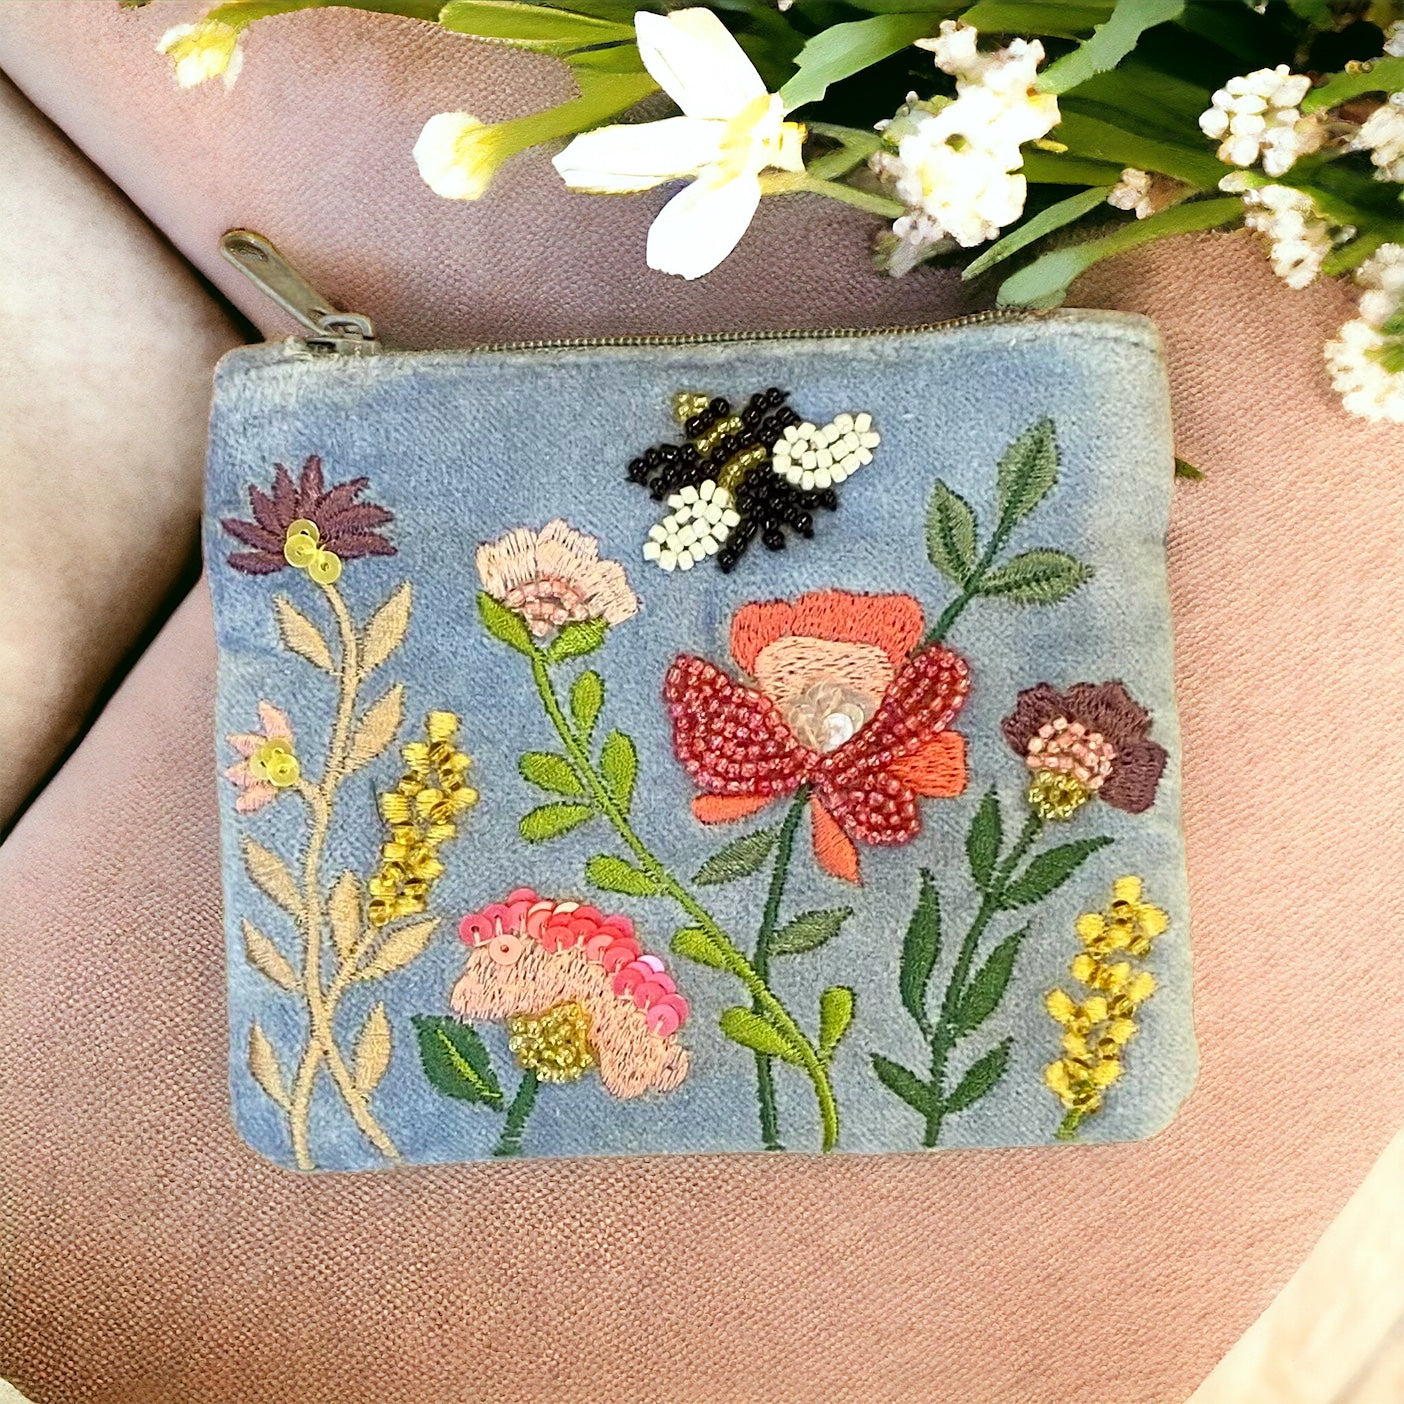 The Flower Garden and Bee on Pale Blue Cotton Velvet Purse